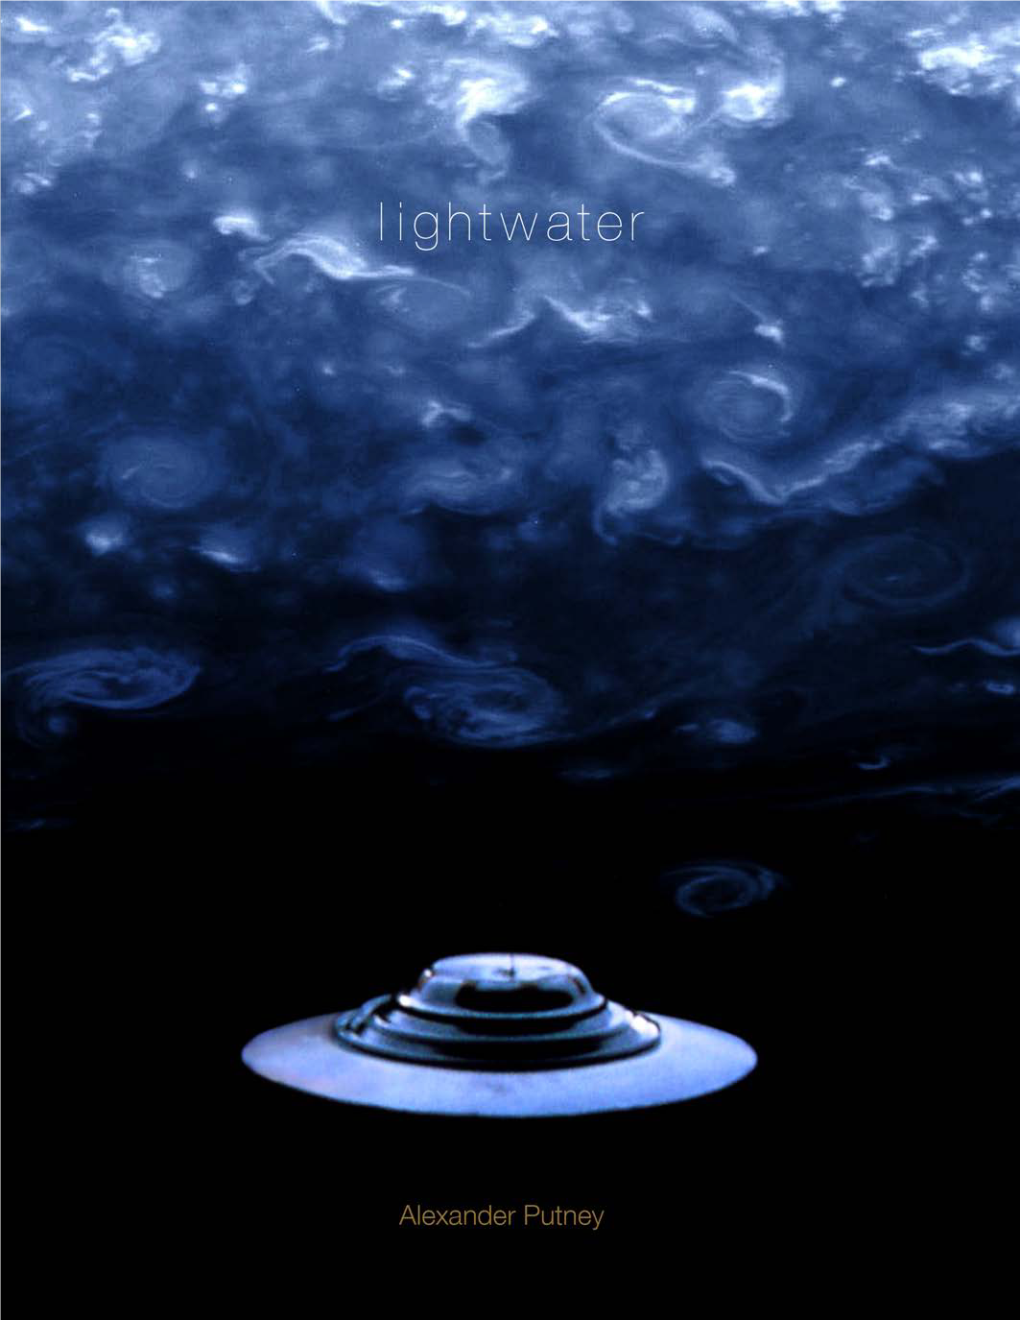 Lightwater Vapor to Become a Fourth-Density Environment of HHO Plasma